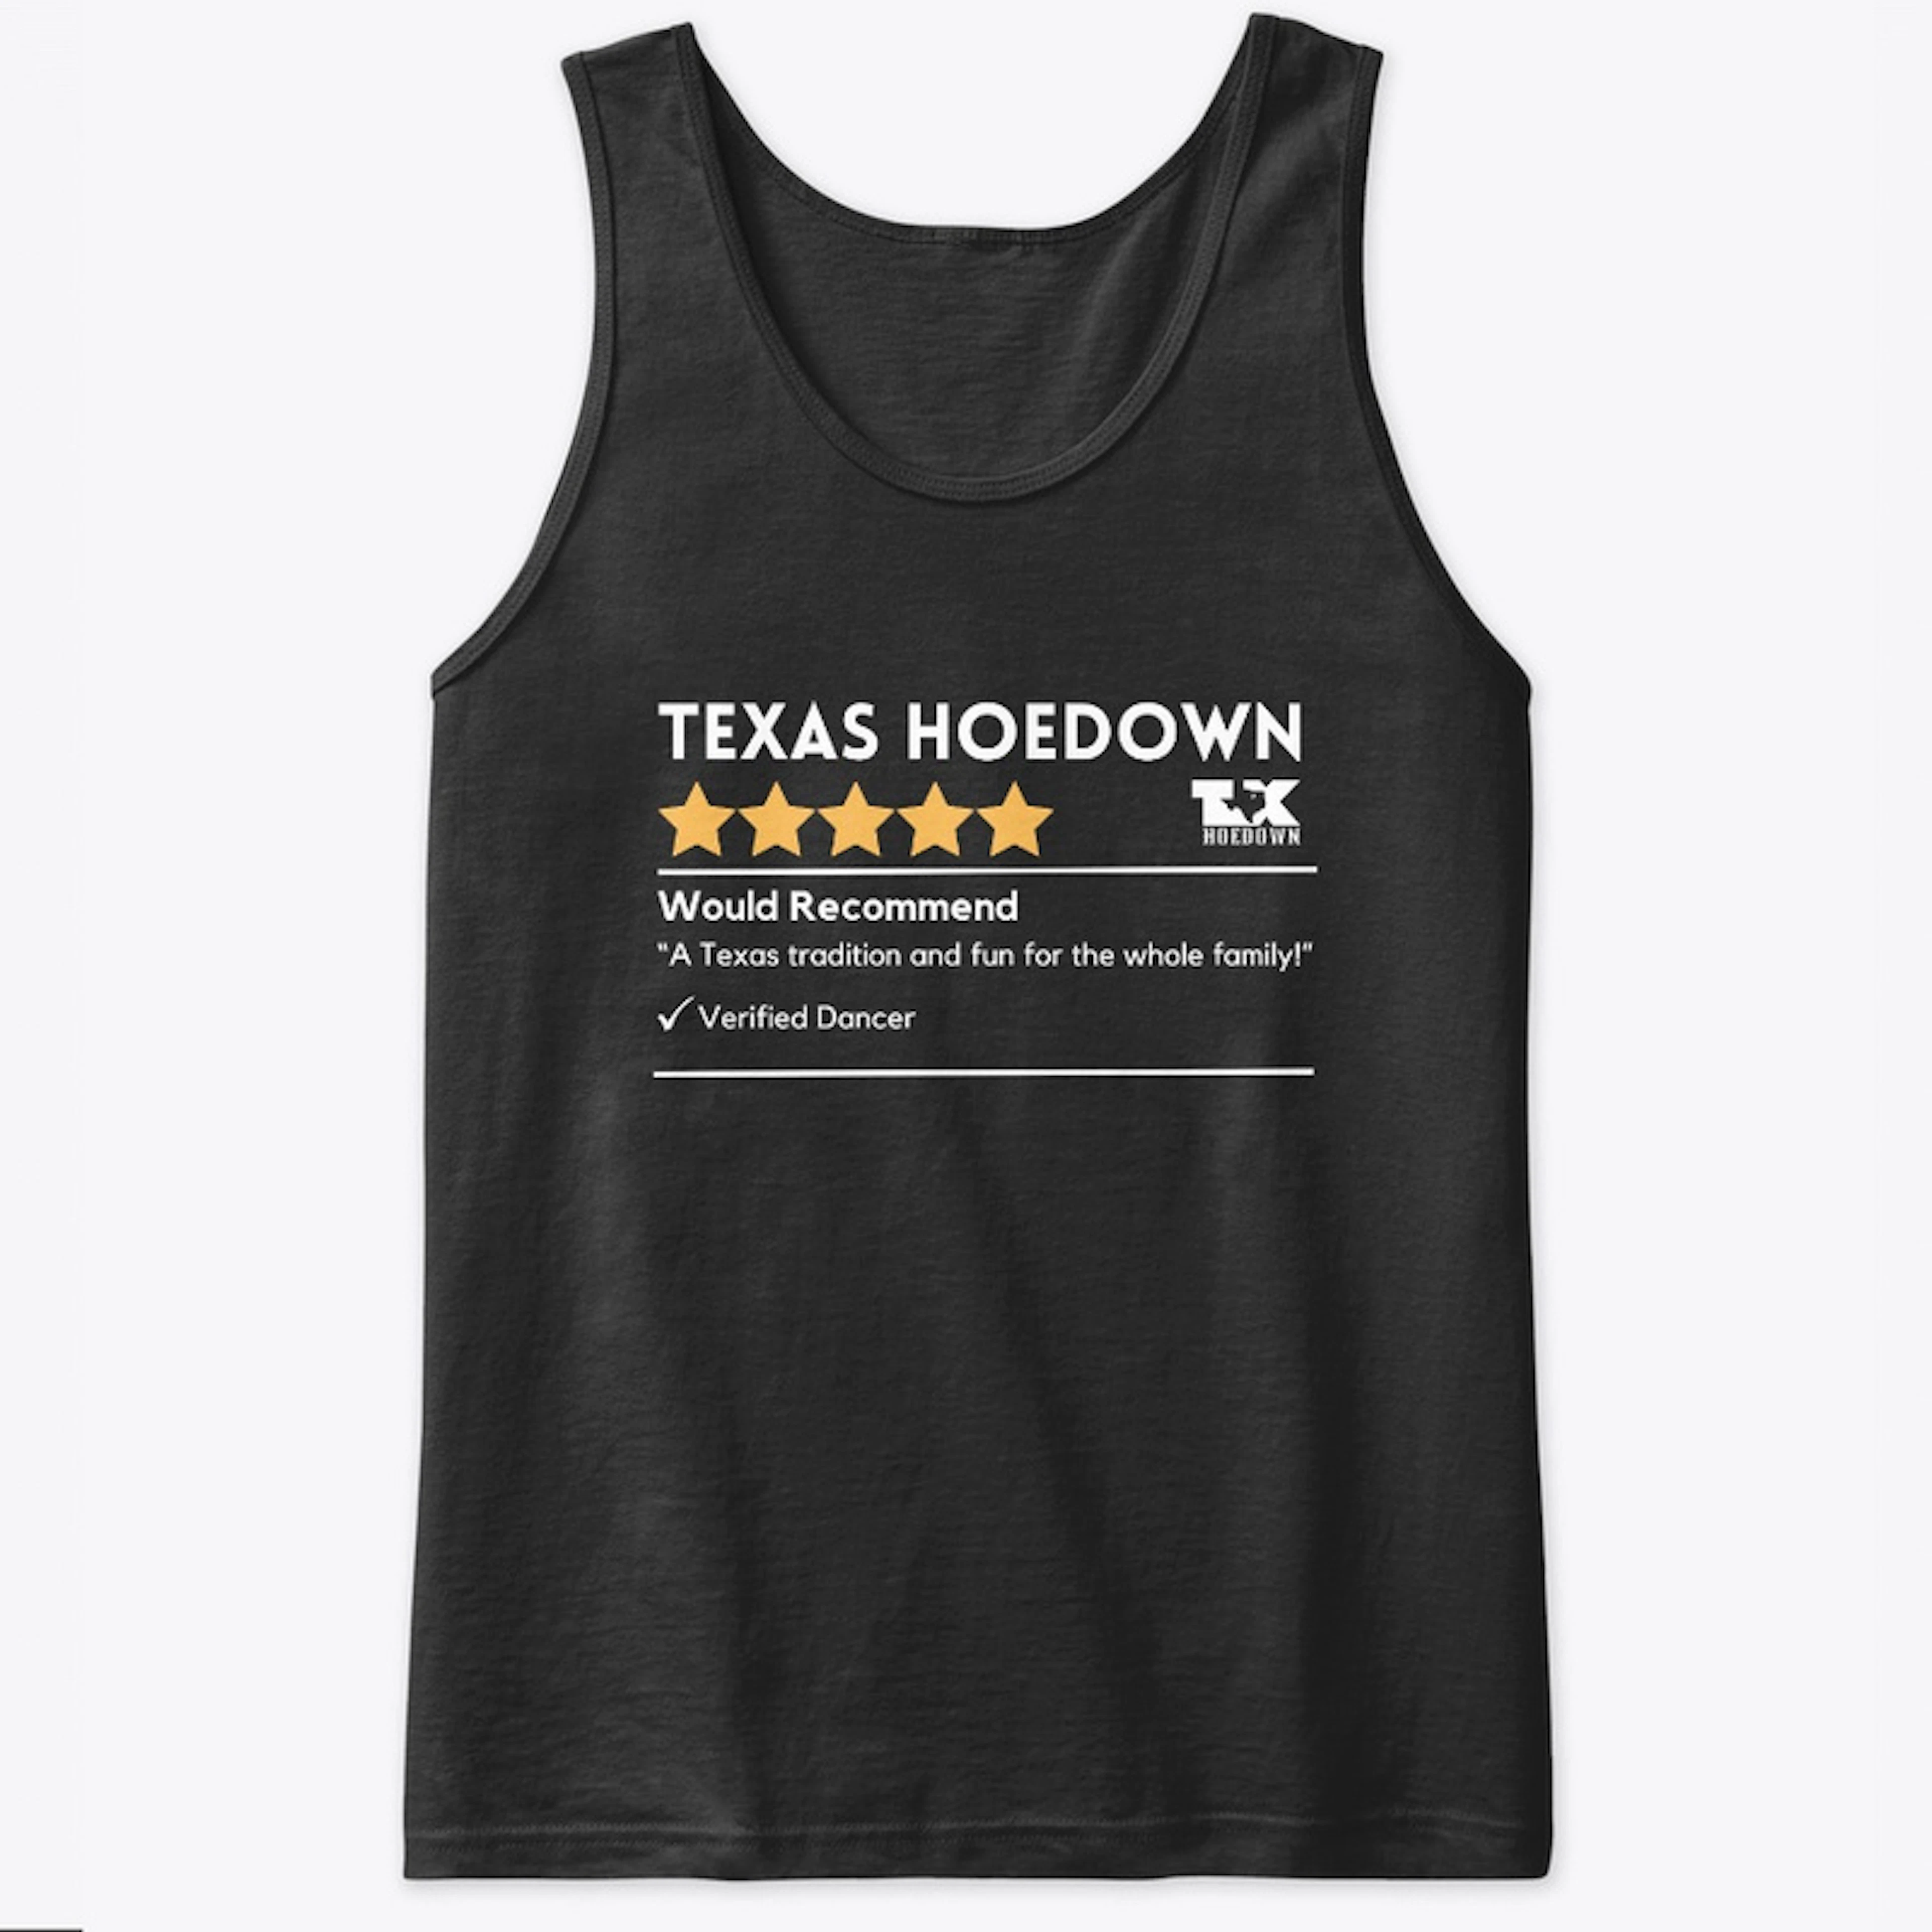 Texas Hoedown...Would Recommend